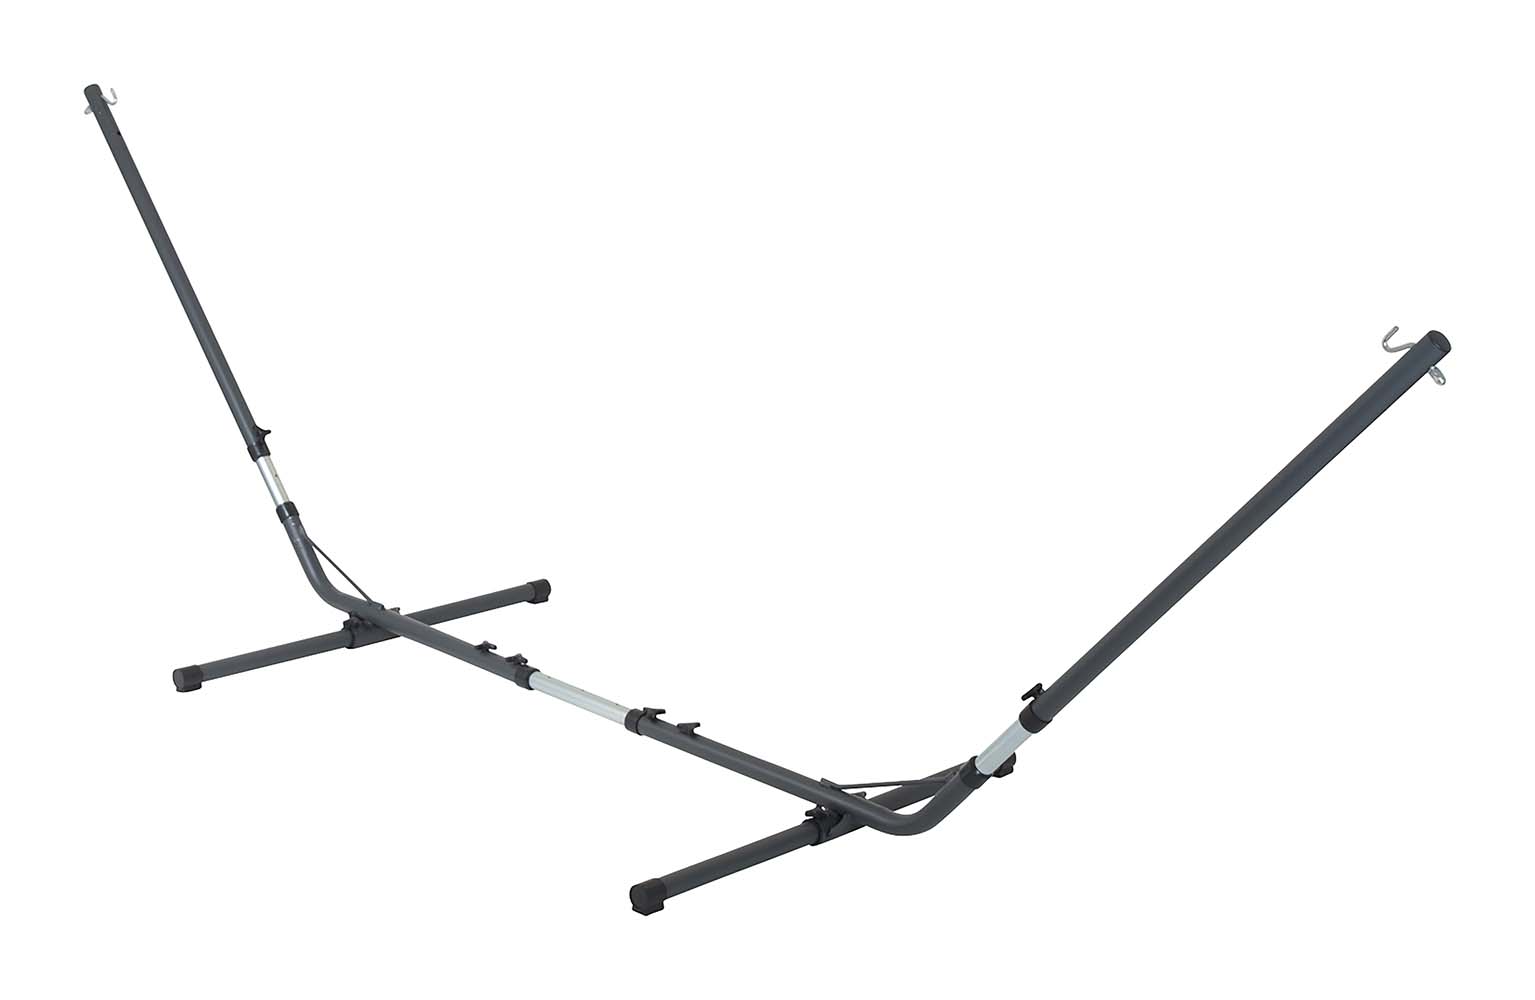 7100211 A sturdy universal hammock stand. A steel frame to attach a hammock. Because the poader coating frame is adjustable both in length and height, almost every hammock fits. Including metal hooks. Suitable for hammocks with a total length of 285 to 385 centimeters. The height is adjustable from 105 to 135 centimeters. Store after consumption.